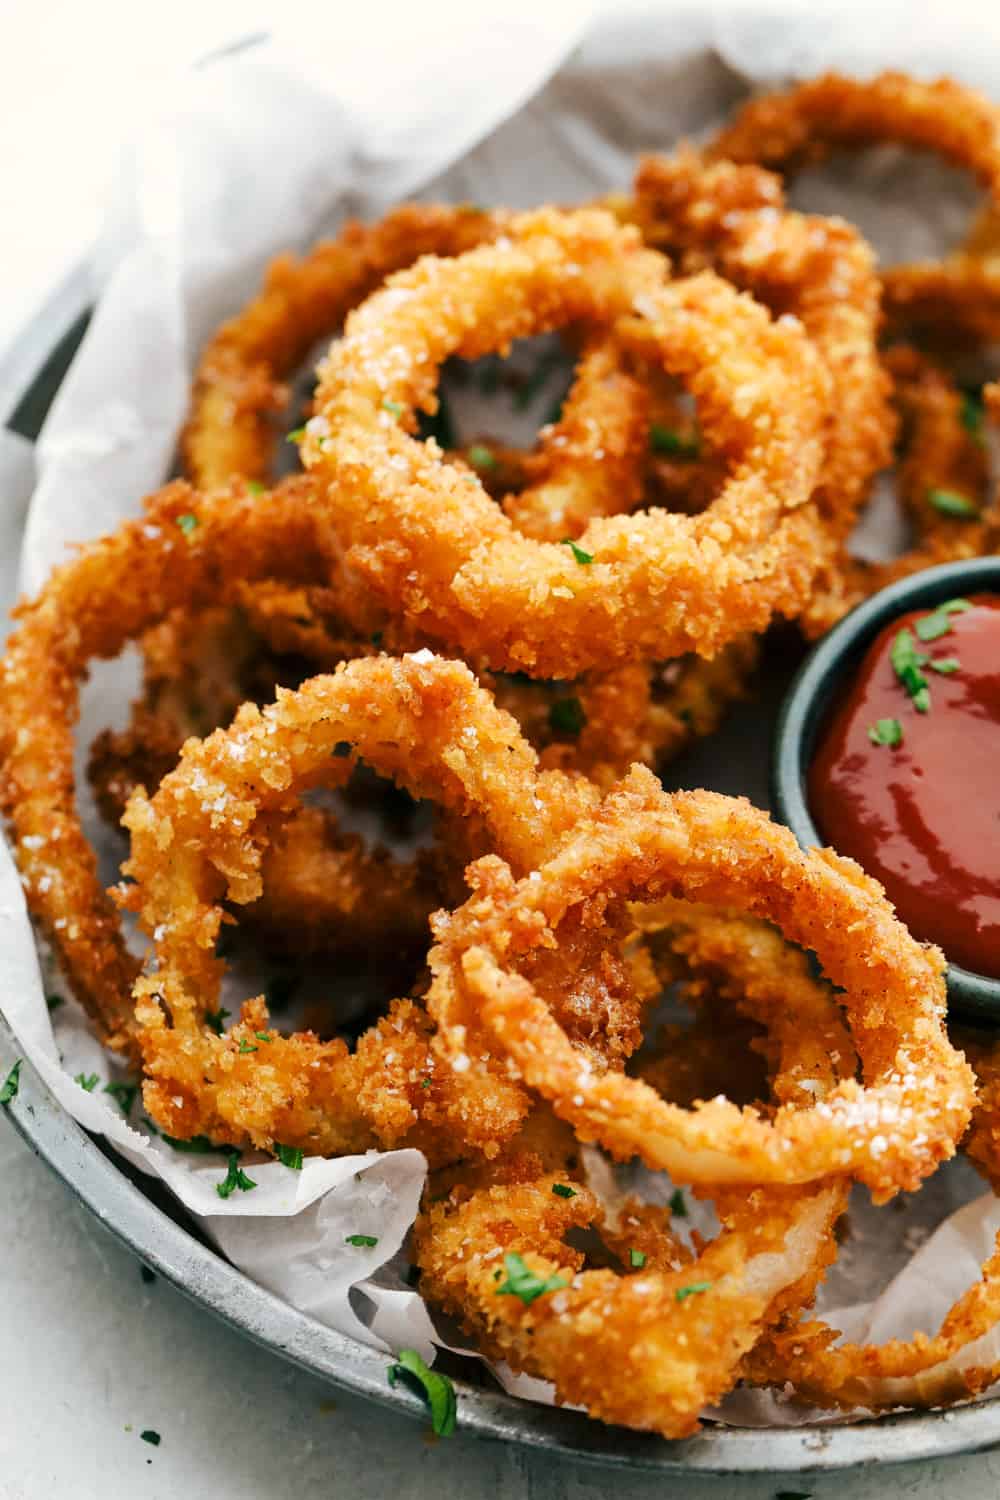 Crispy Onion Rings (Baked or Fried!) - Yummy Recipe